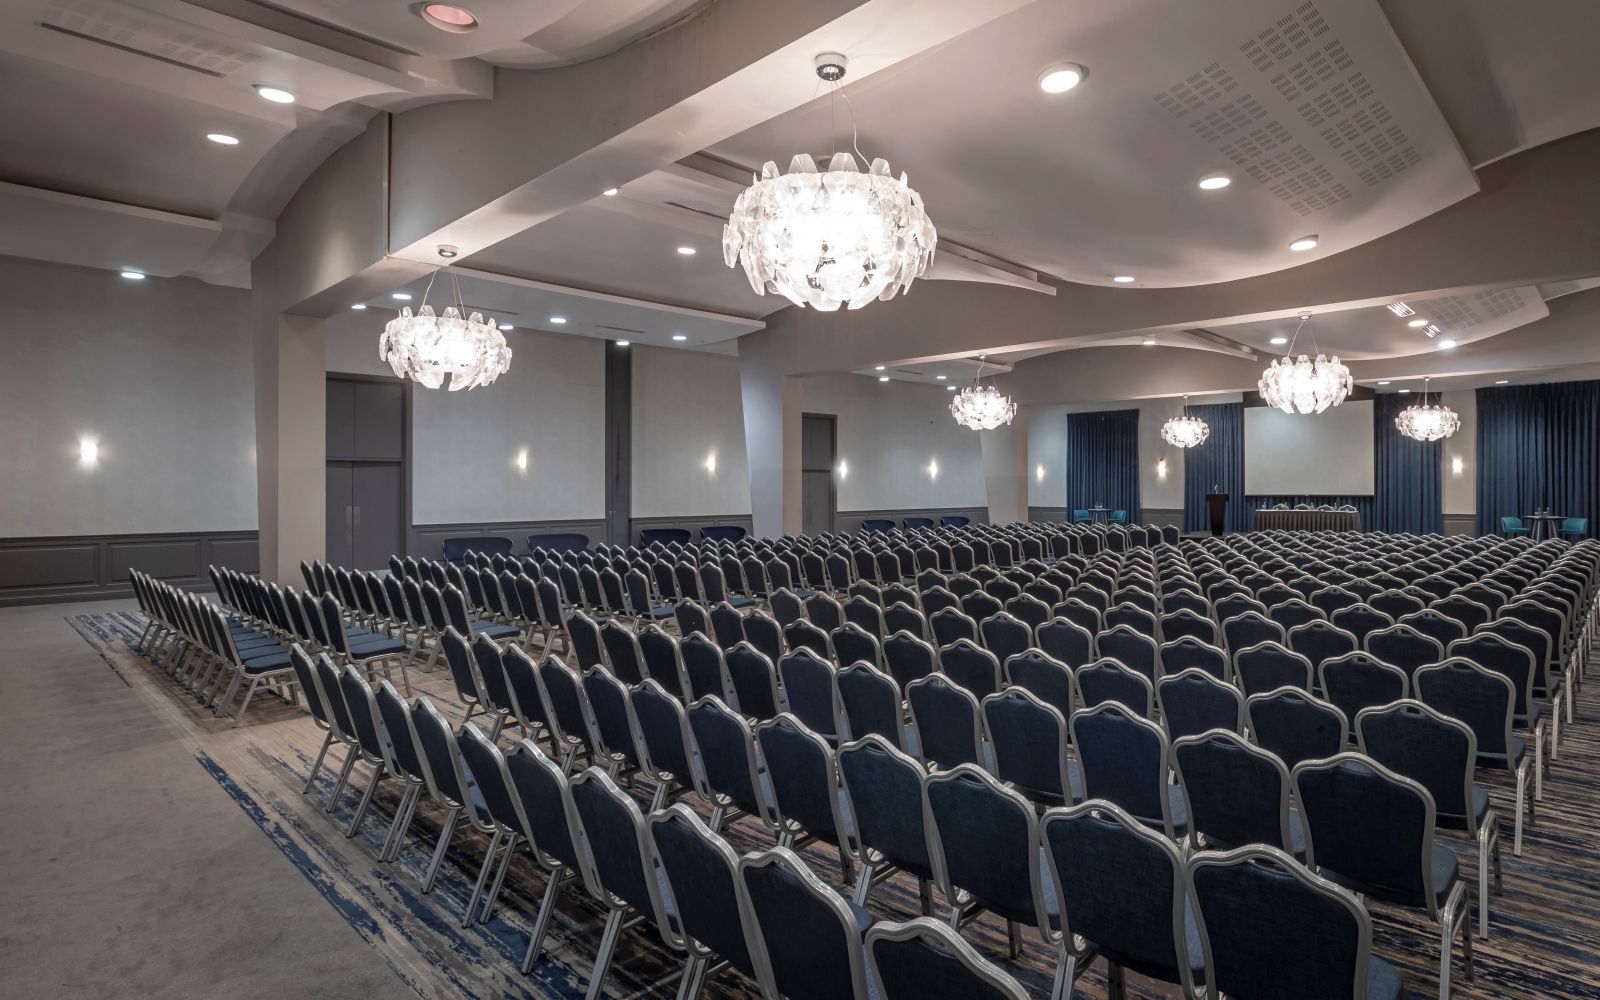 Conference Theatre Style www.pillohotelashbourne.com